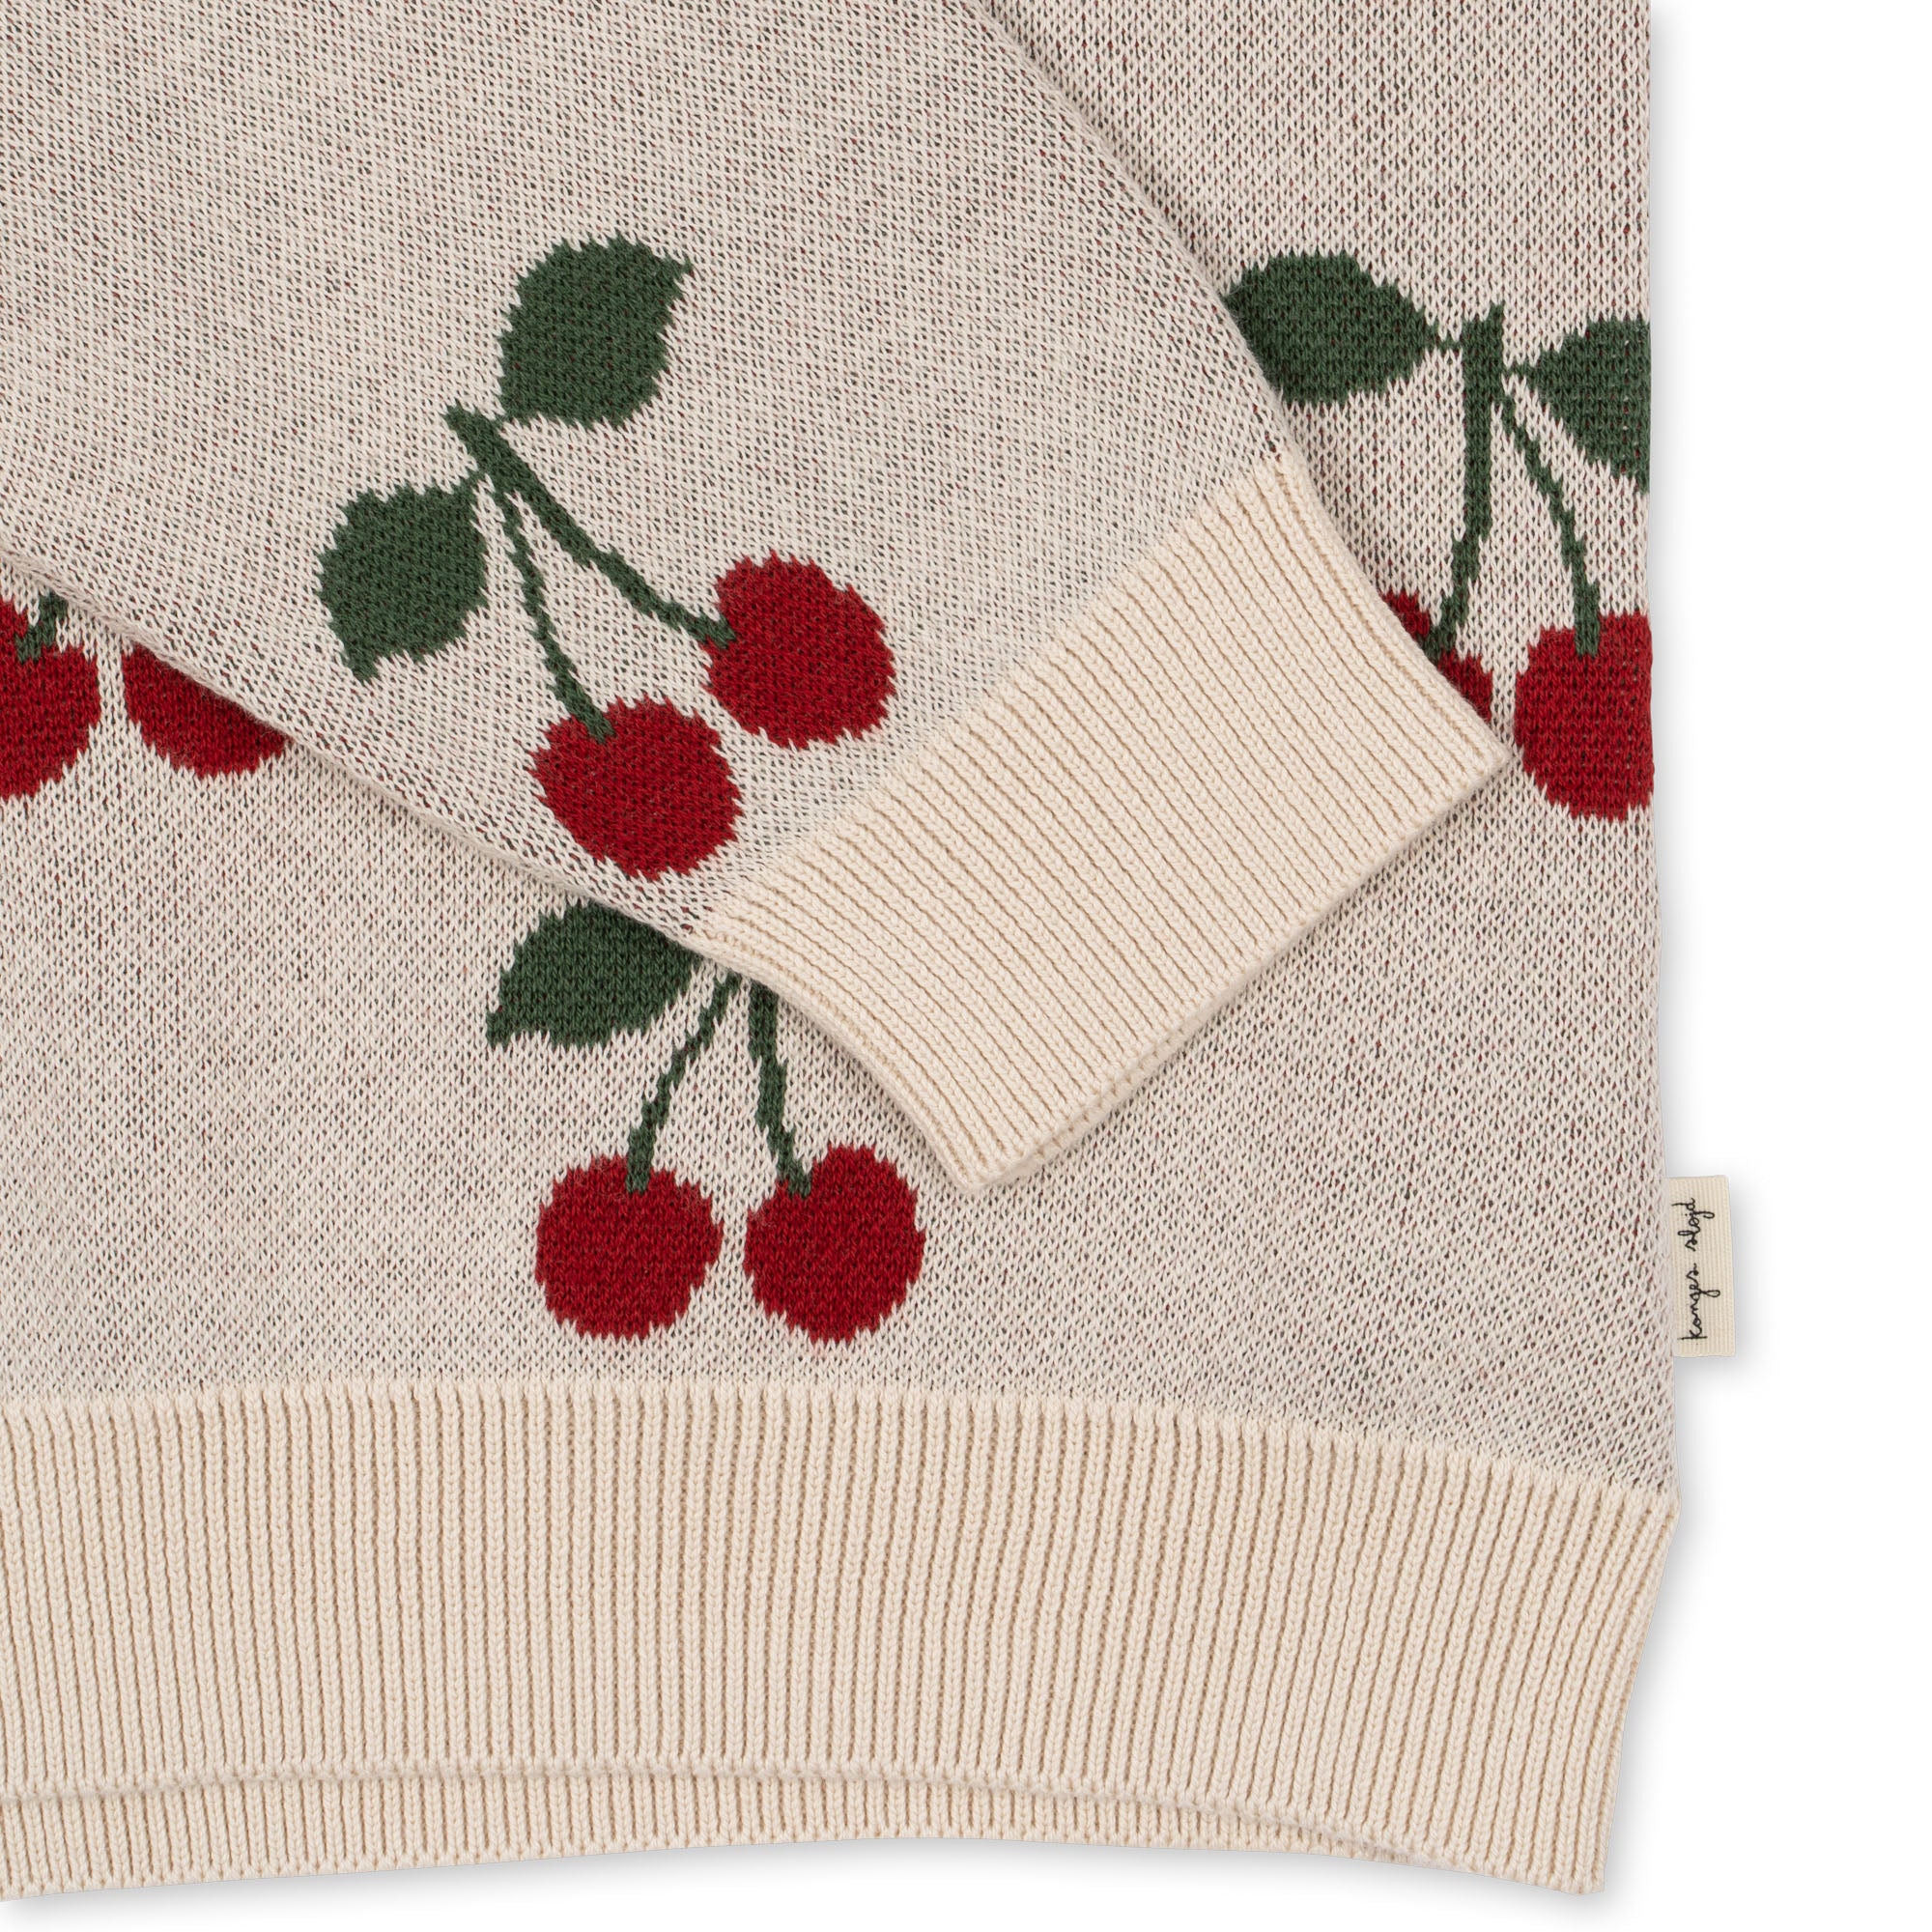 Konges Sløjd A/S KNITTED BLOUSES & VESTS CHERRY